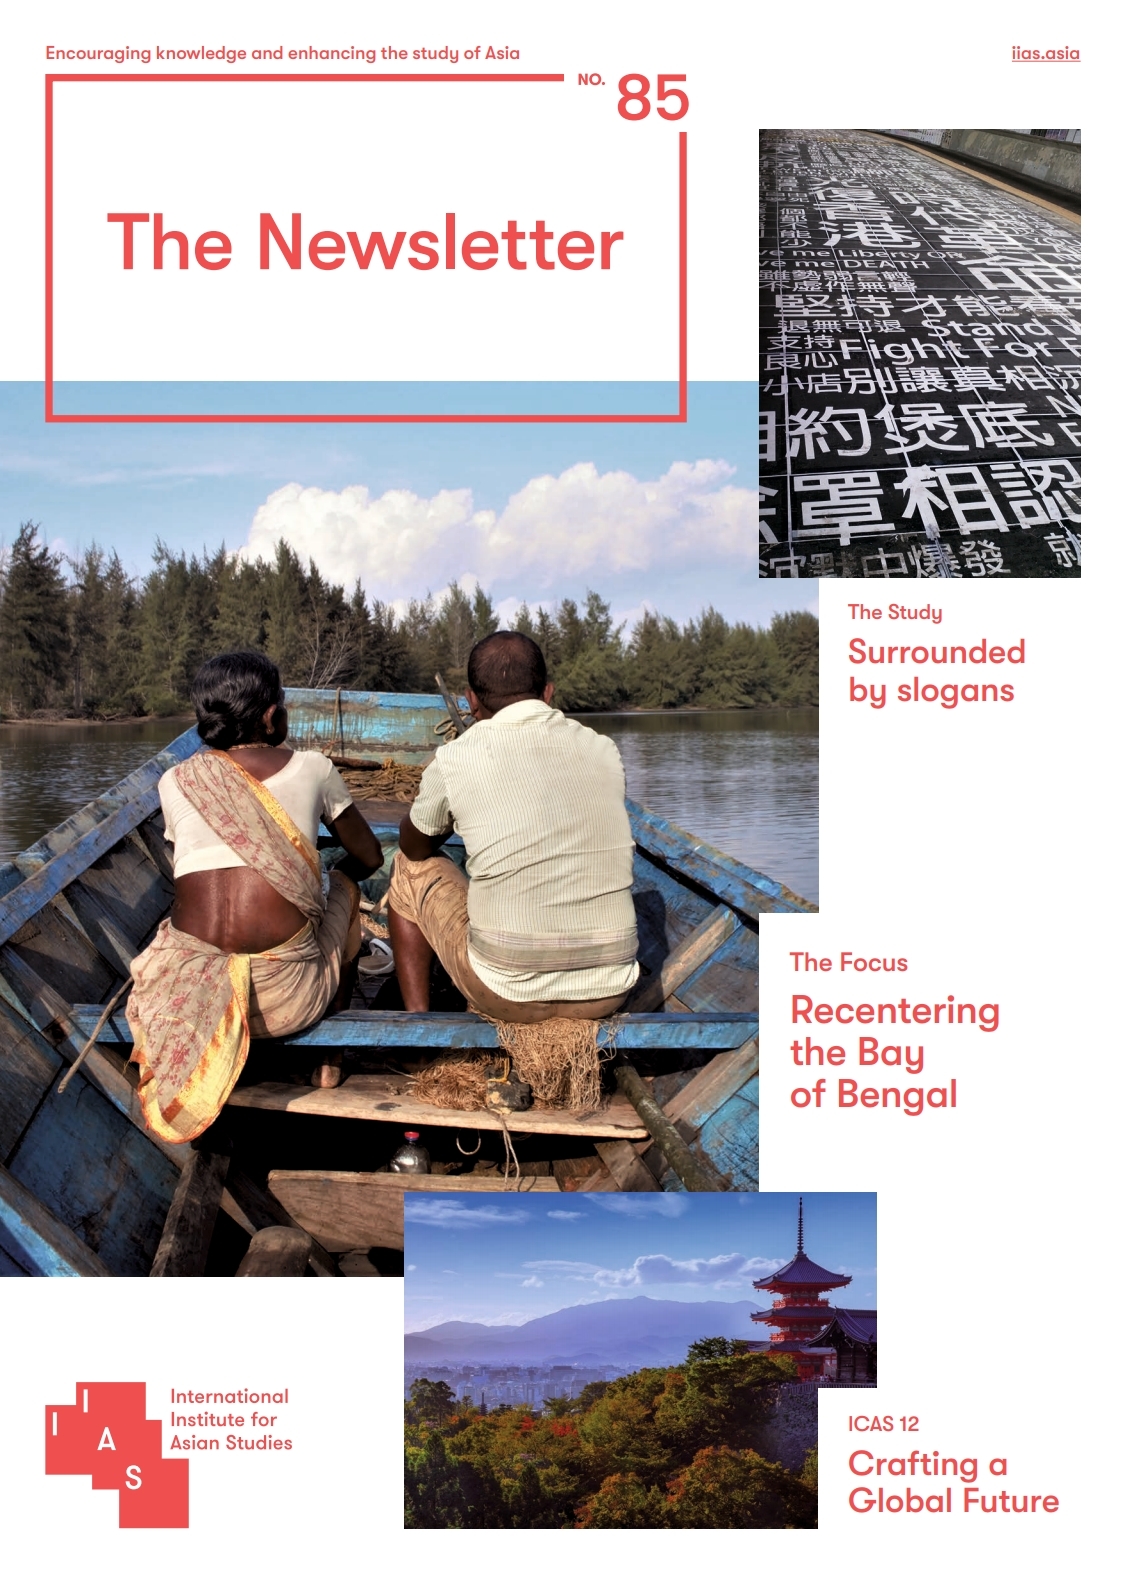 IIAS 〈The Newsletter〉 Vol. 85 – News from Northeast Asia